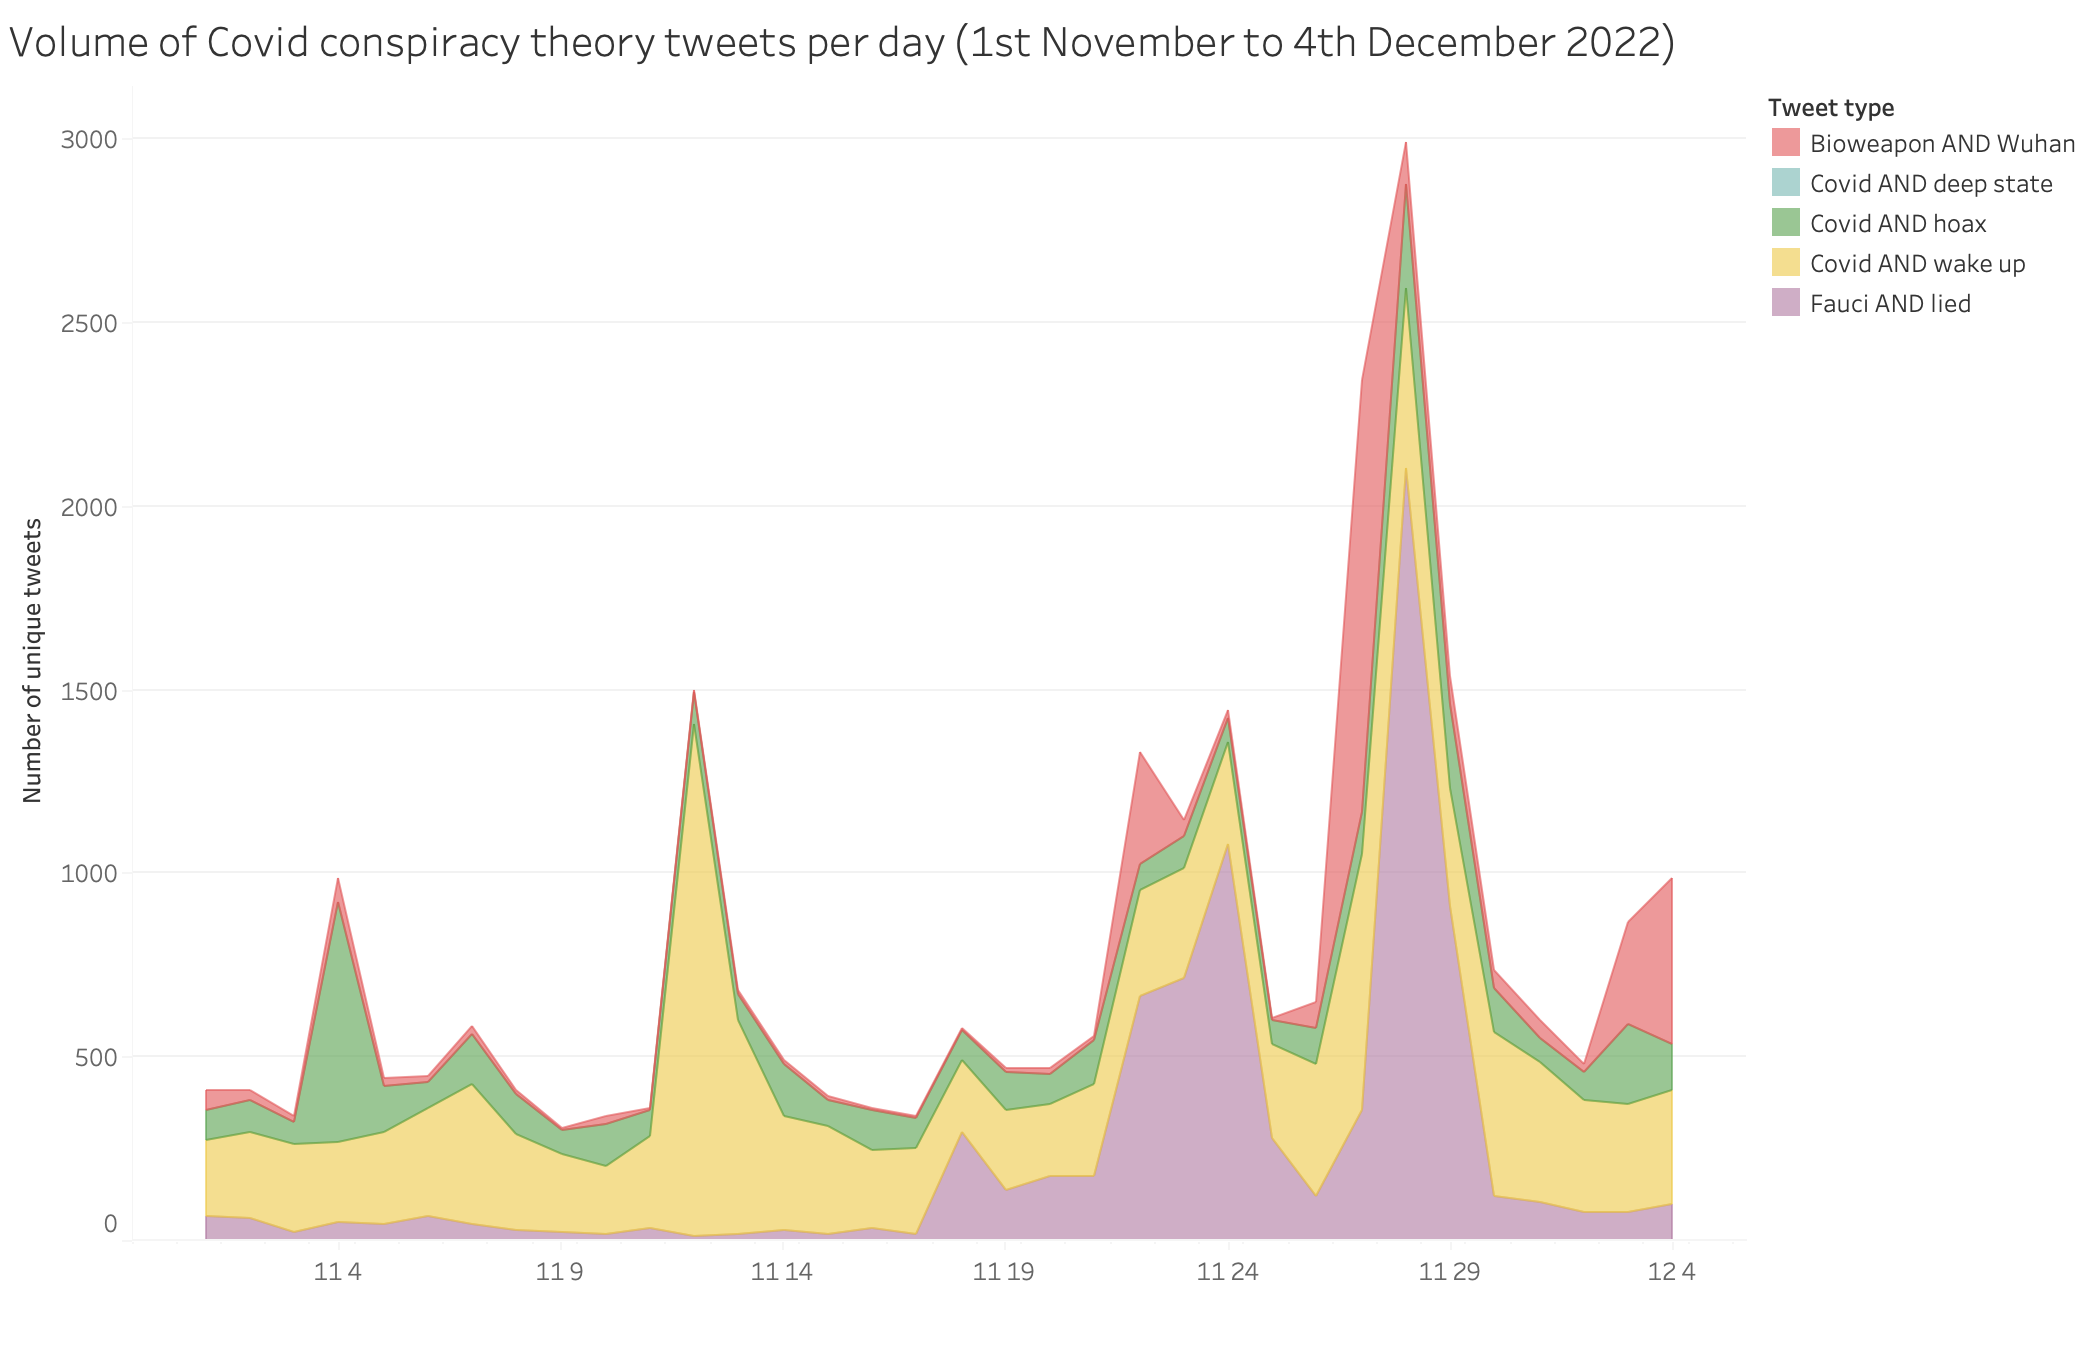 Volume of COVID conspiracy tweets per day